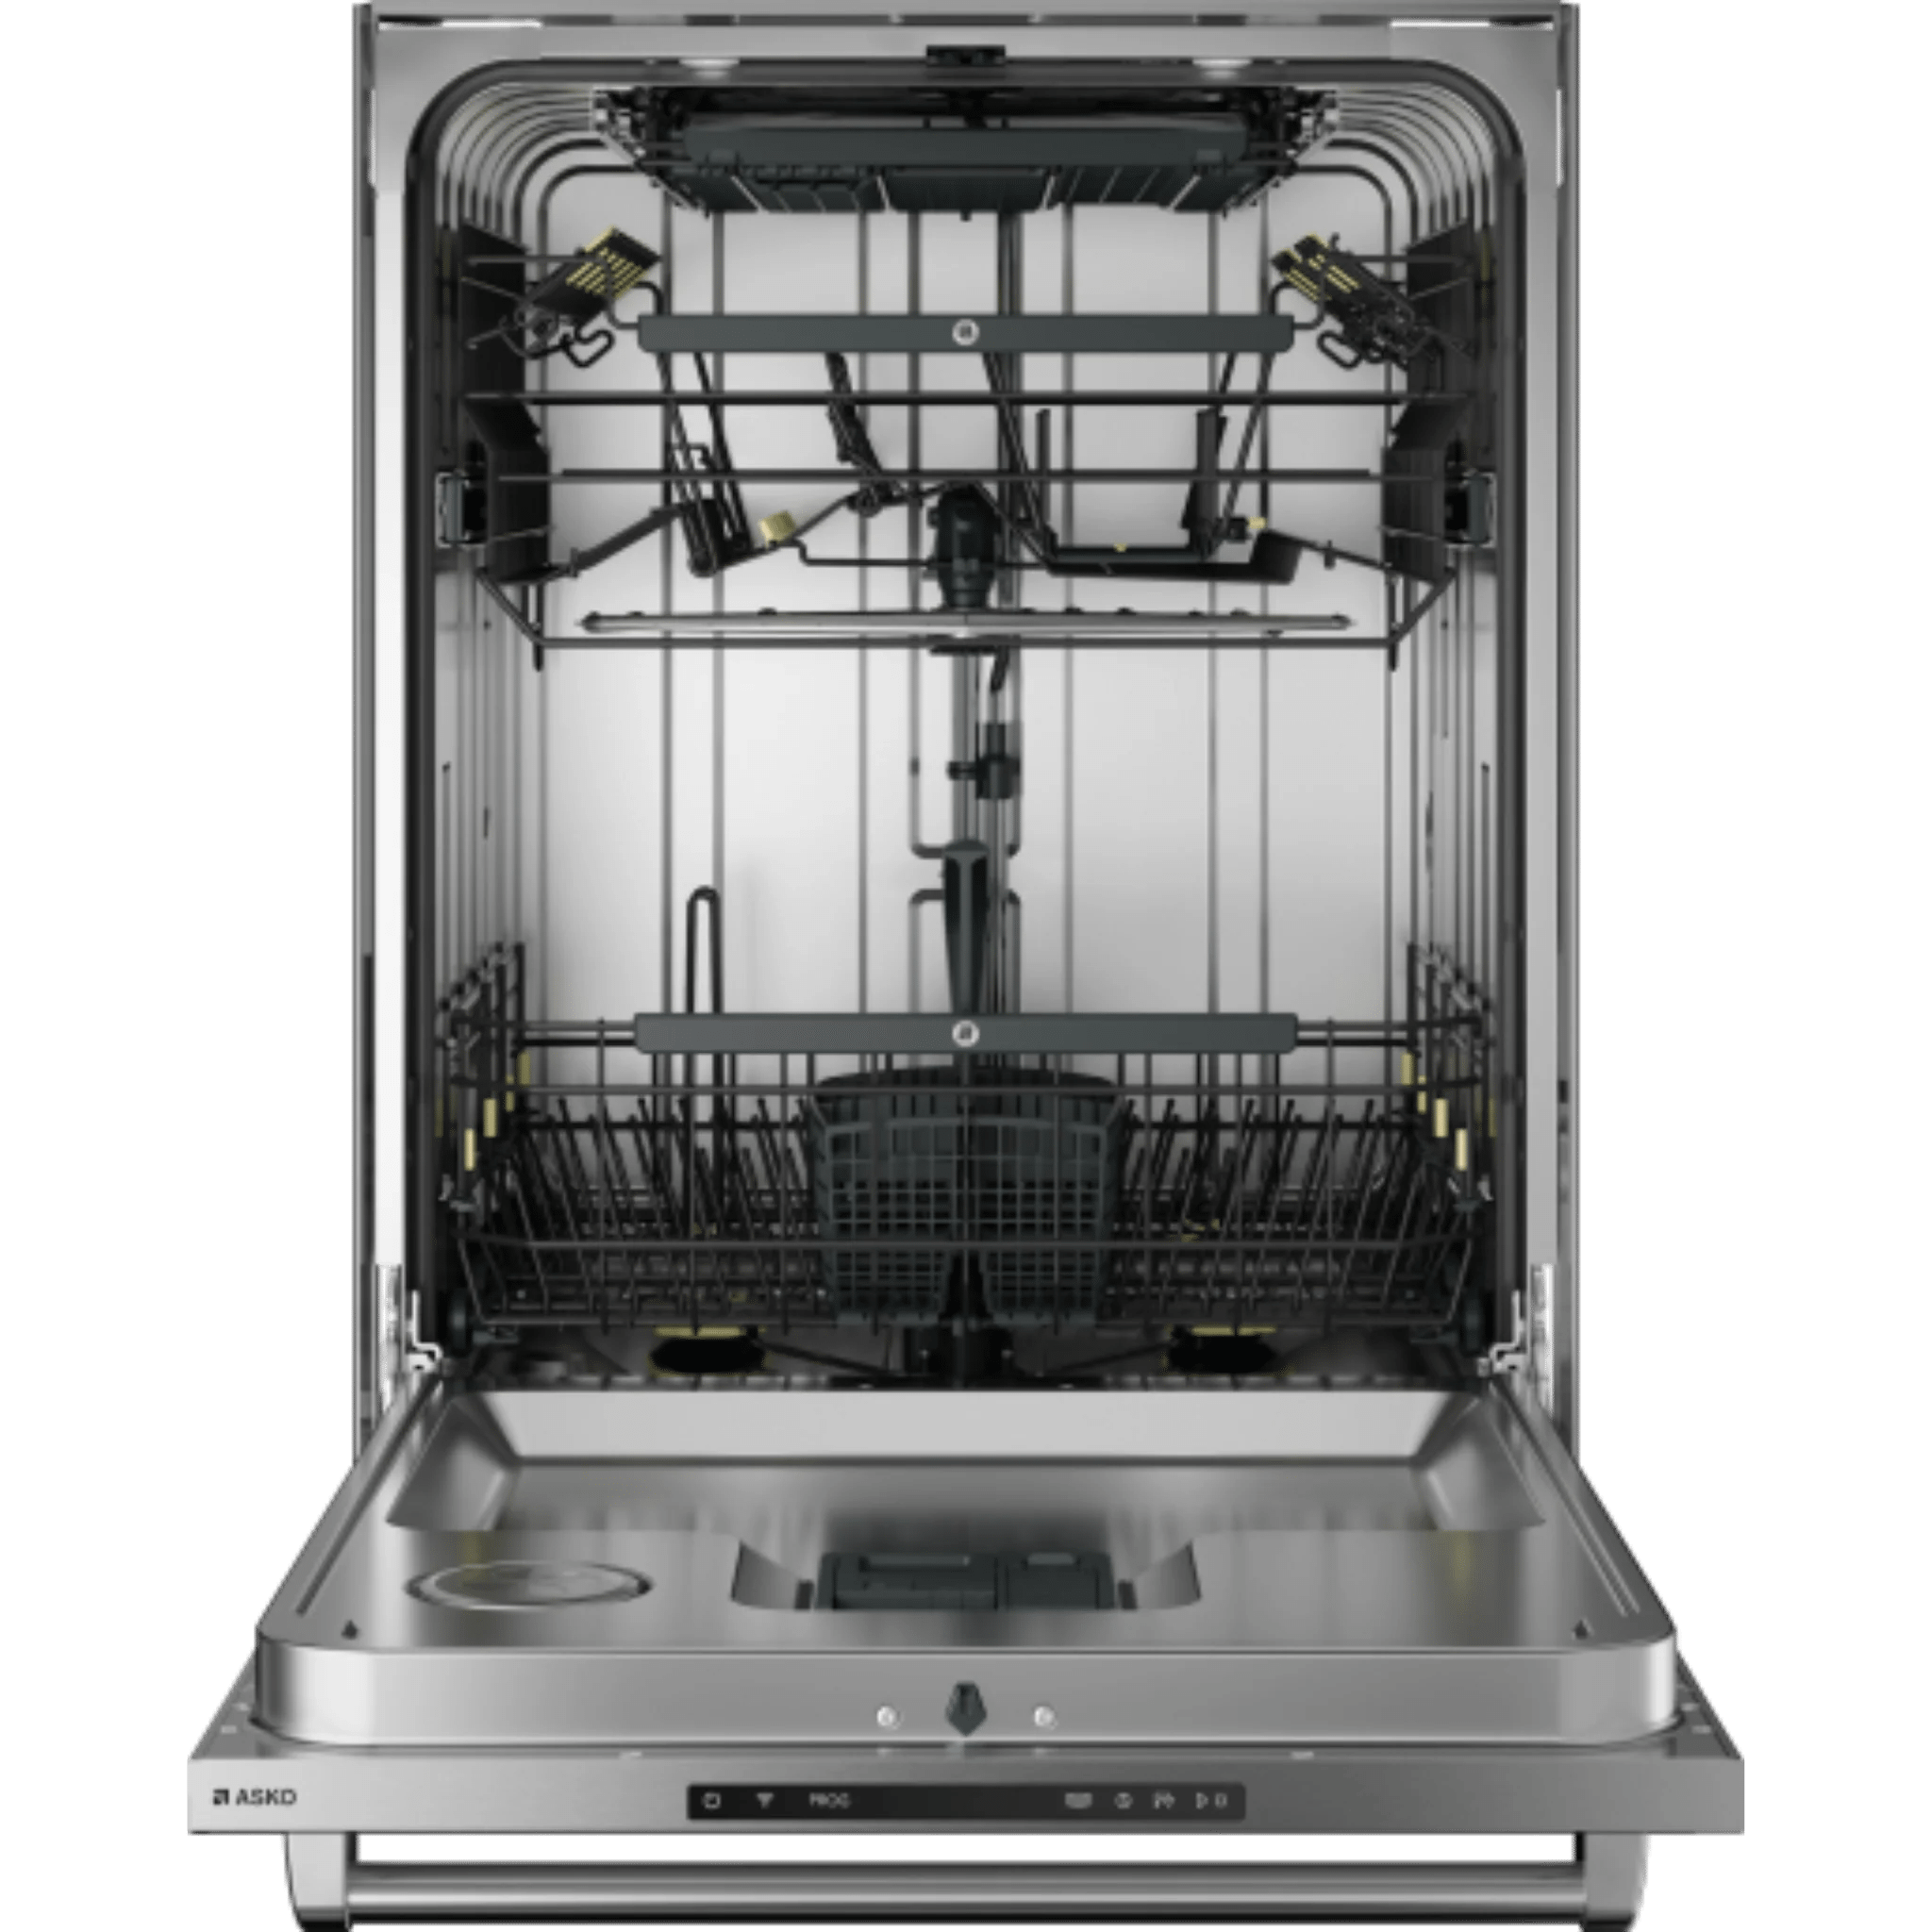 Asko Logic 24 Inch Wide 16 Place Setting Built-In Top Control Dishwasher with Pro Handle, XXL Tub, and Auto Door Open Drying™ Dishwashers DBI565PHXXLS Luxury Appliances Direct